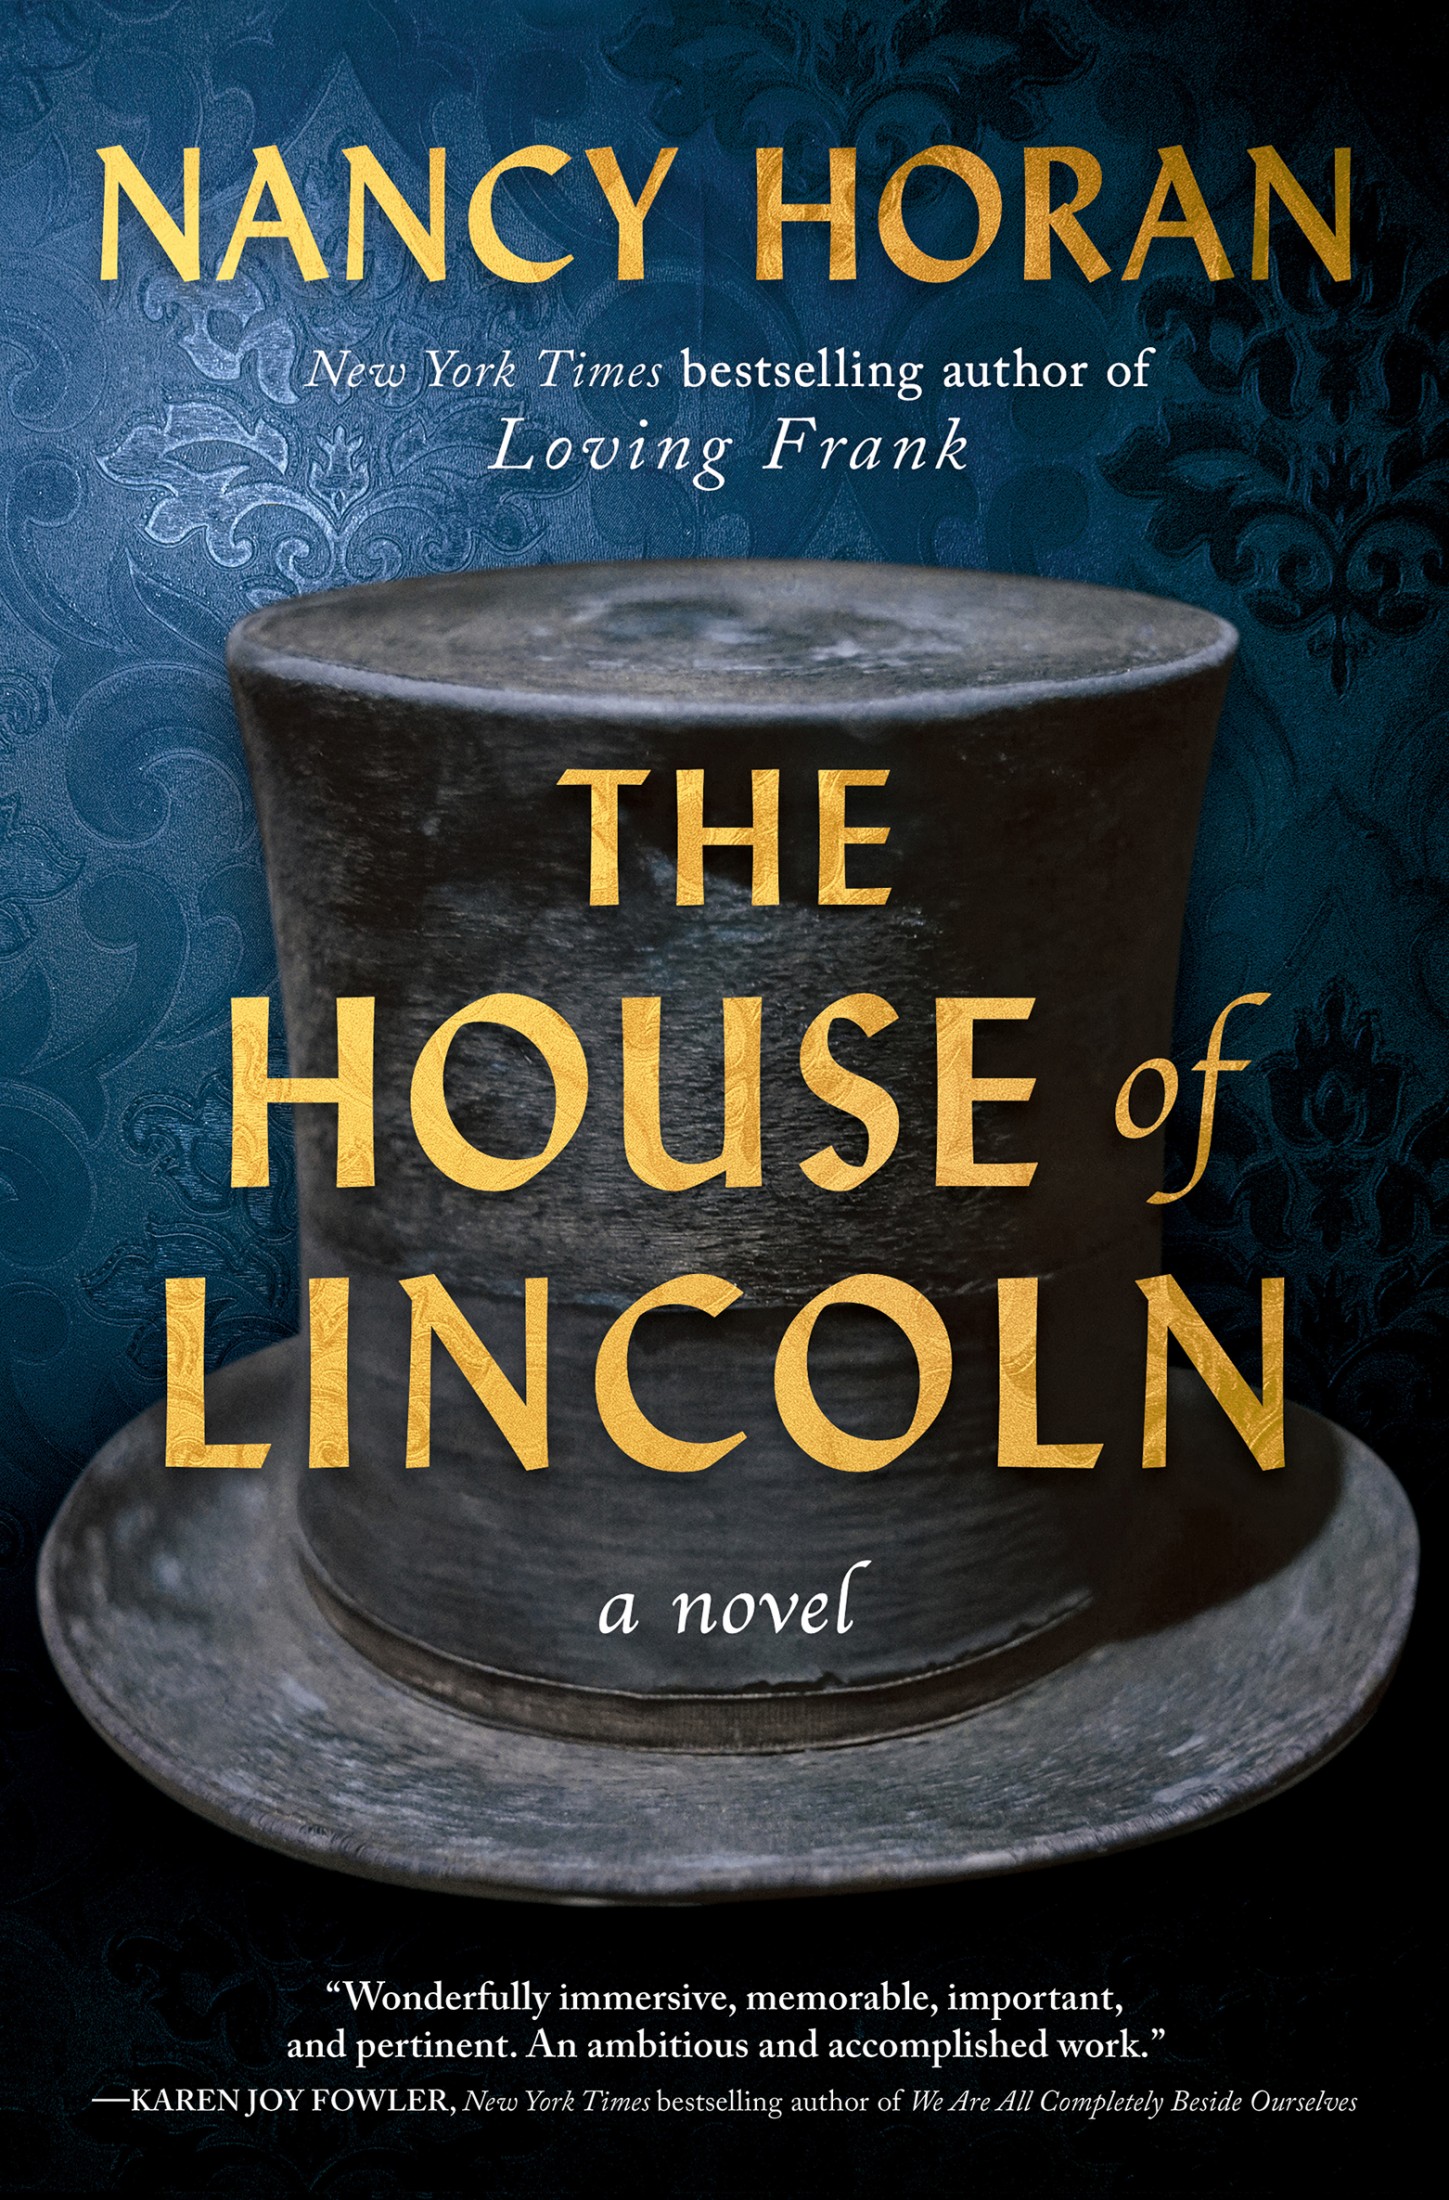 The House of Lincoln